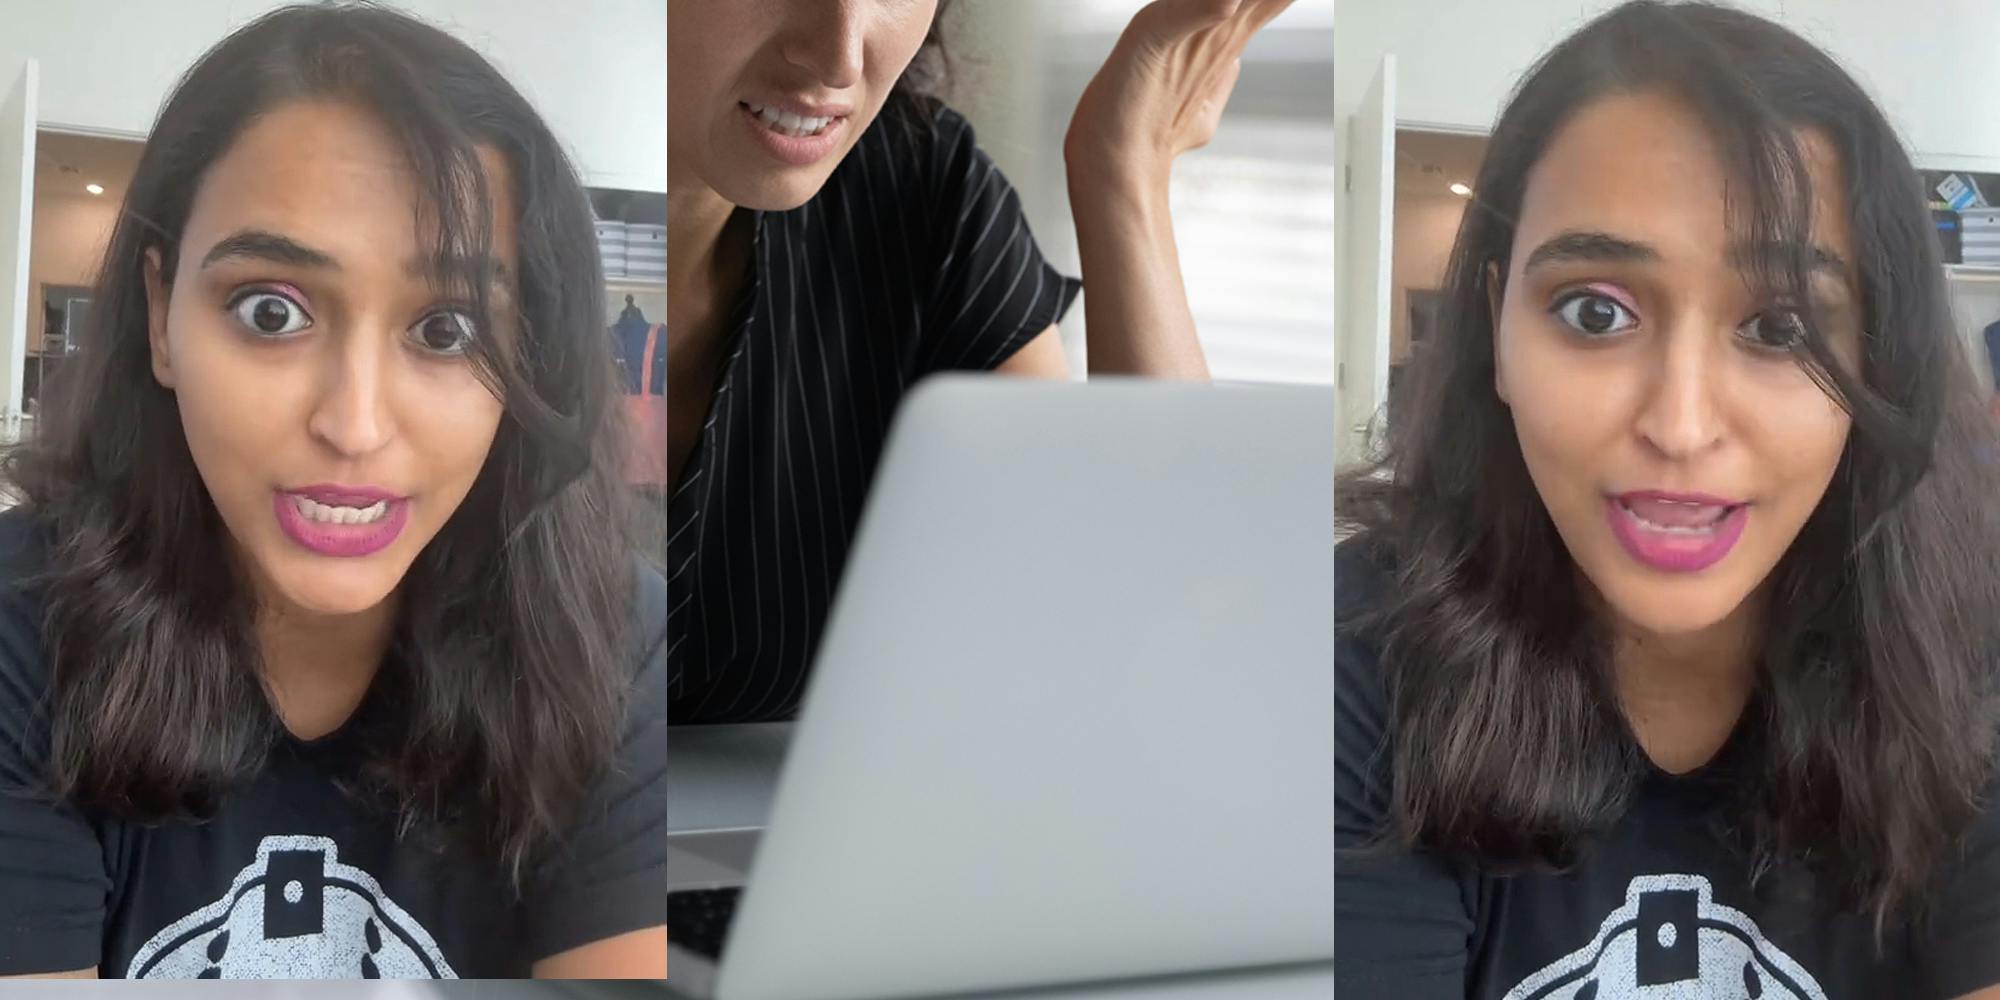 tech recruiter speaking (l) woman angry at laptop (c) tech recruiter speaking (r)